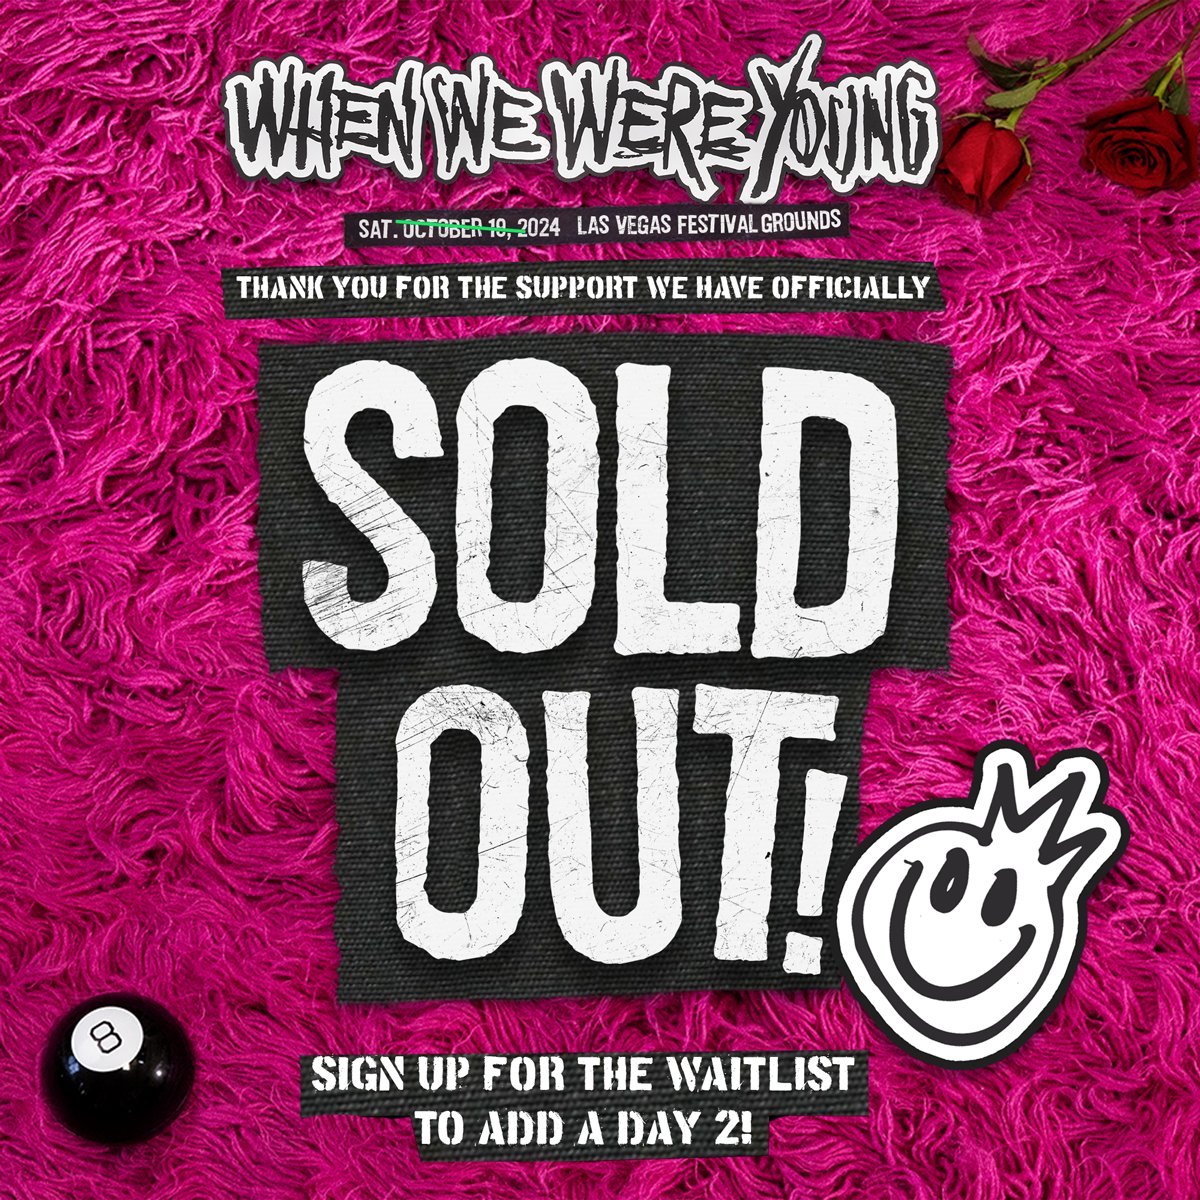 WWWYFest2024 has SOLD OUT! Sign up for the waitlist to add a day 2. 🖤🥀 WAITLIST LINK: whenwewereyoung.frontgatetickets.com/waitlist